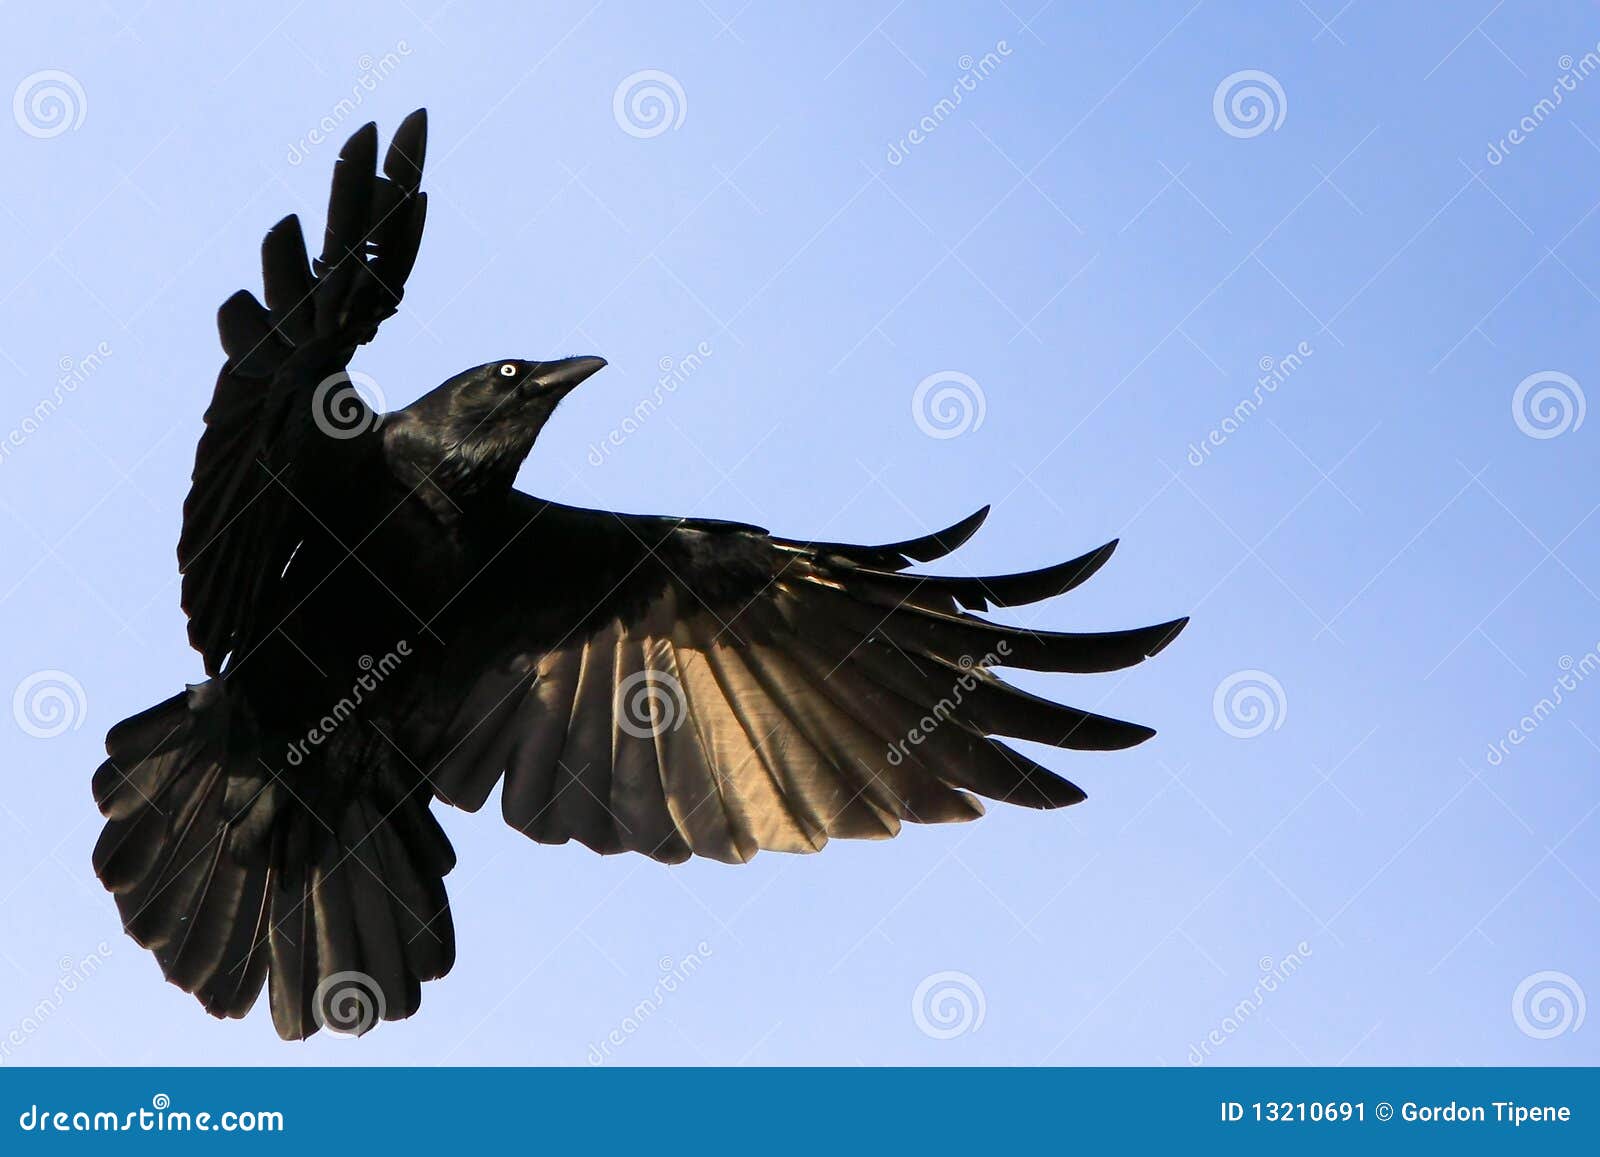 Black Crow In Flight With Spread Wings Stock Image - Image: 13210691